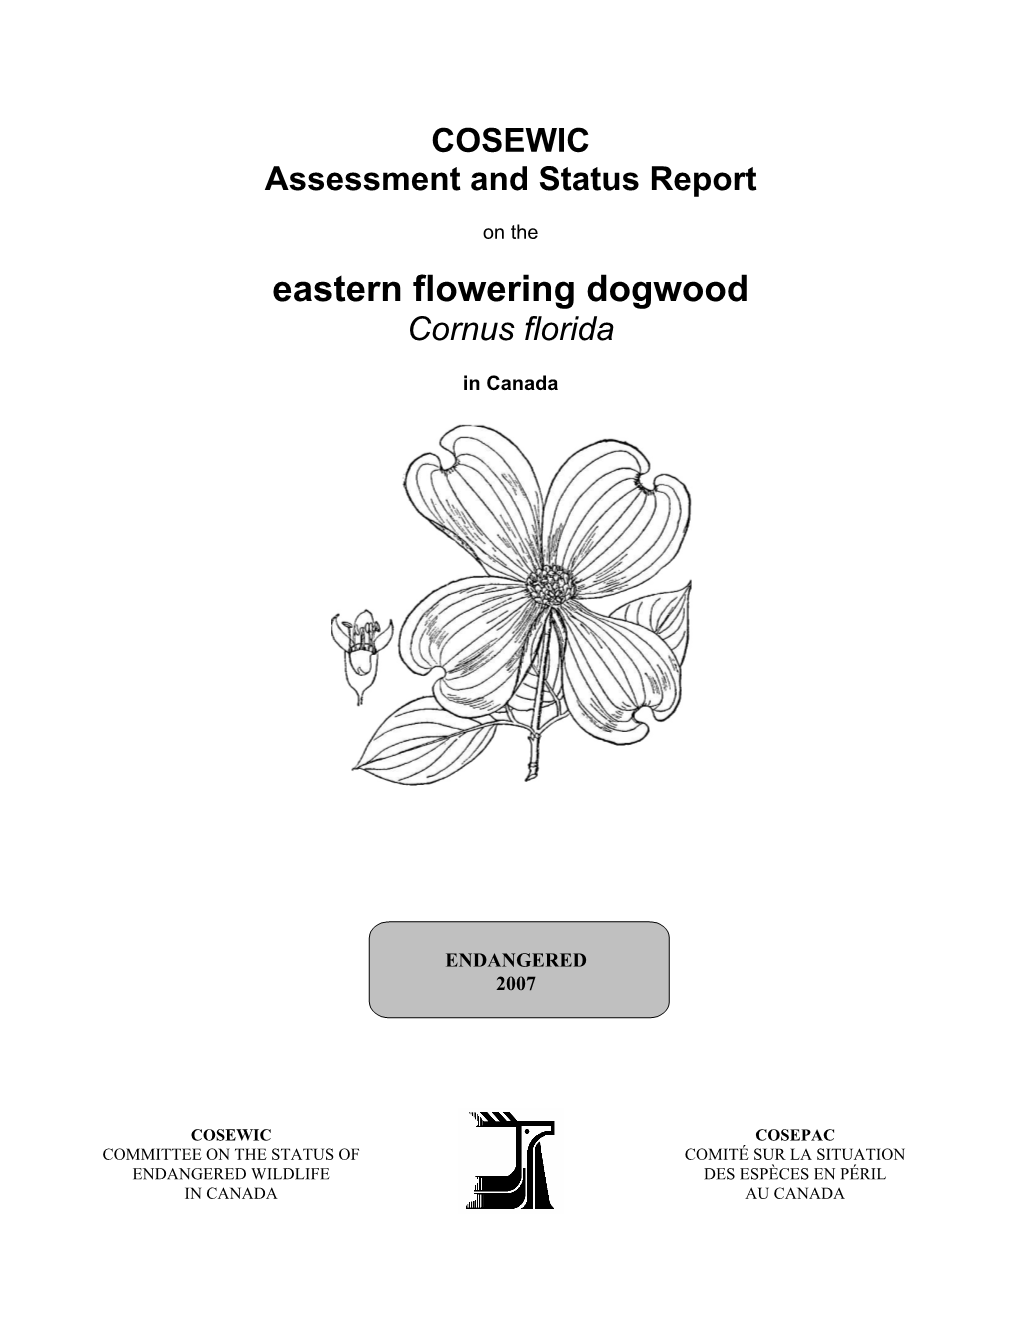 Eastern Flowering Dogwood (Cornus Florida) in Canada, Prepared Under Contract with Environment Canada, Overseen and Edited by Dr